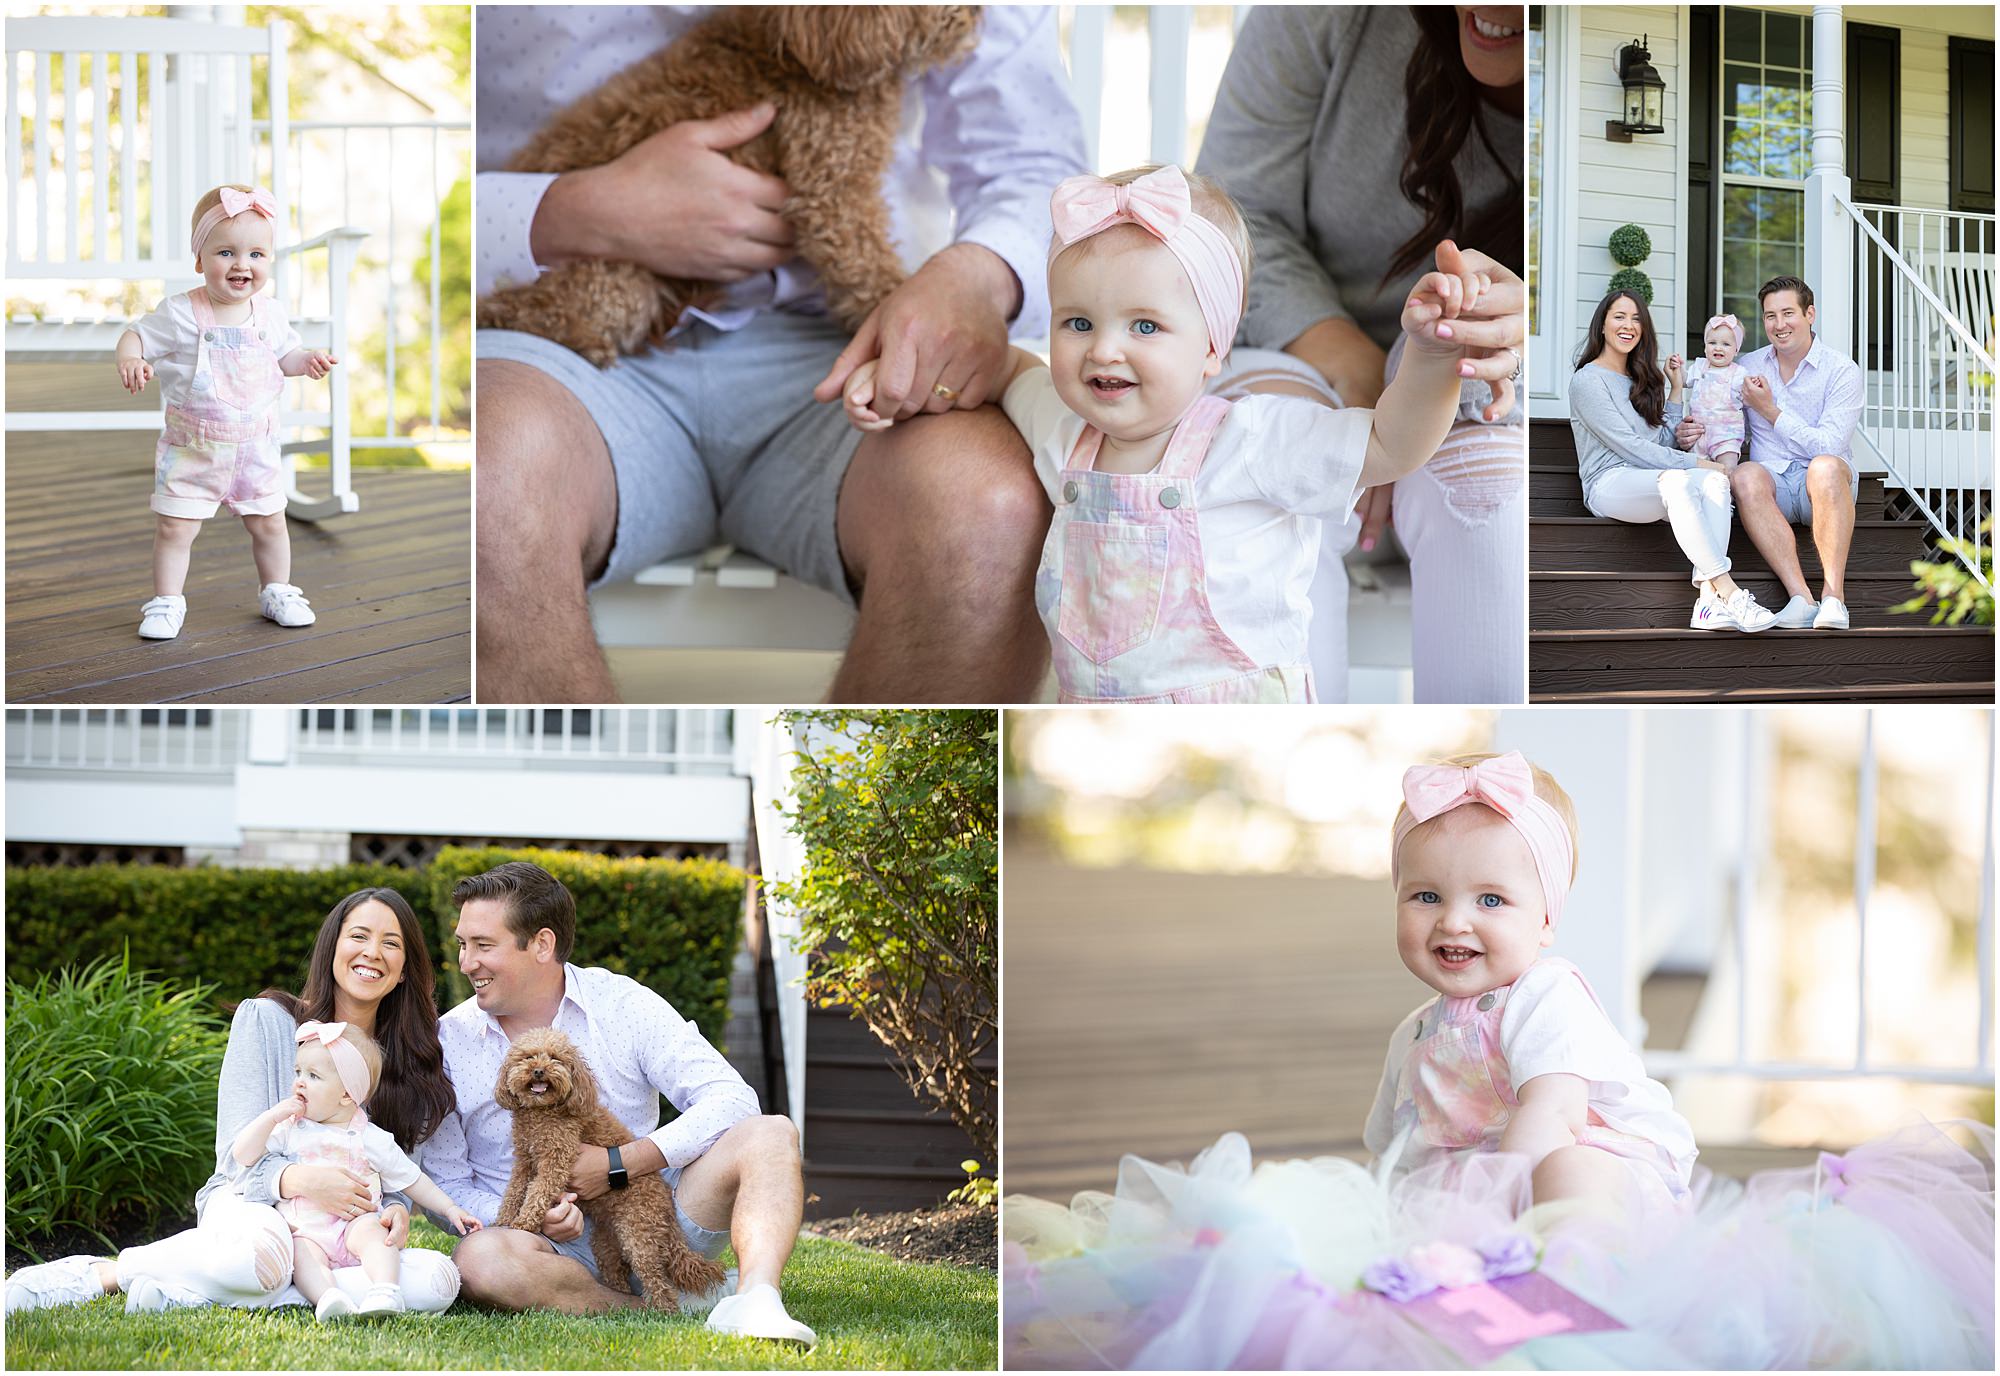 Susan Hennessey is a Moorestown based photographer specializing in family photography